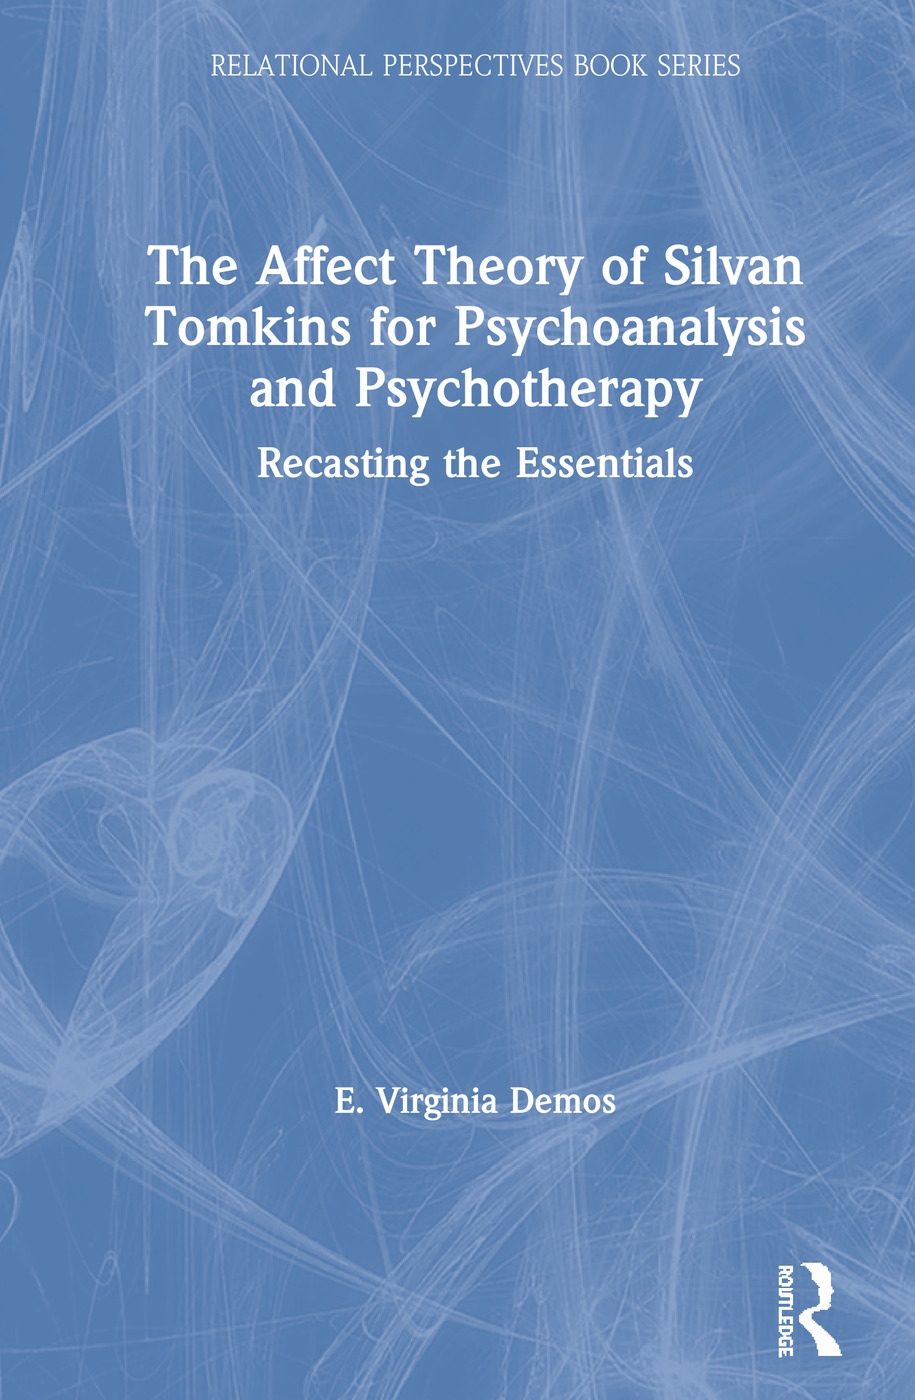 The Affect Theory of Silvan Tomkins for Psychoanalysis and Psychotherapy: Recasting the Essentials